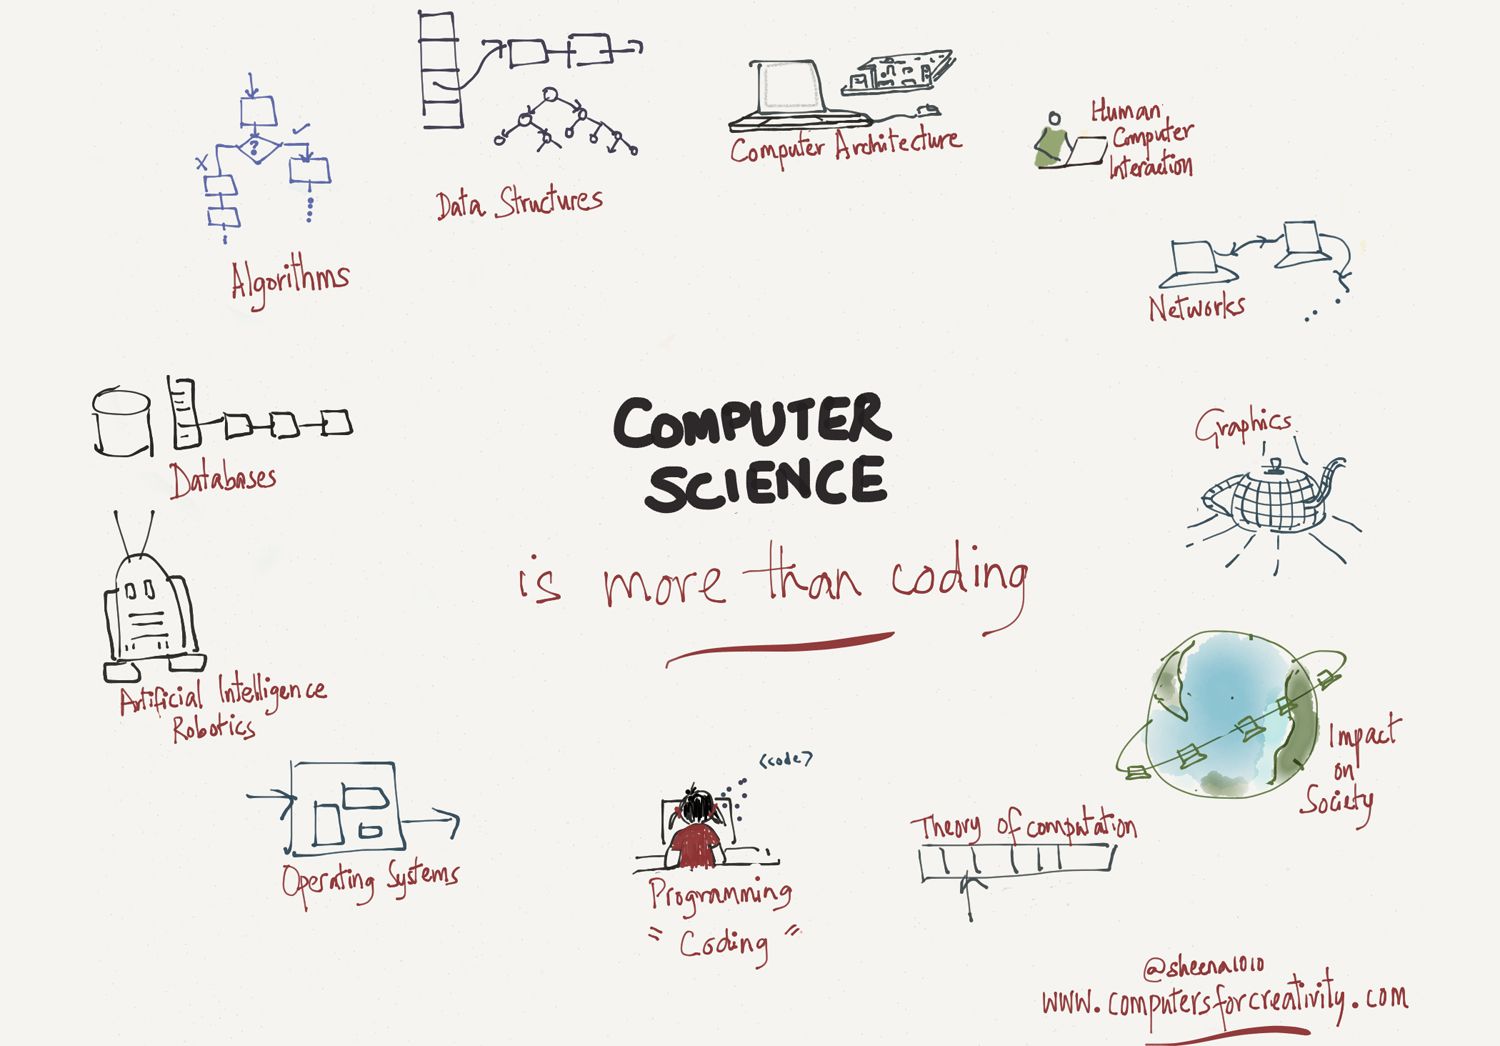 A diagram showing different parts of computer science